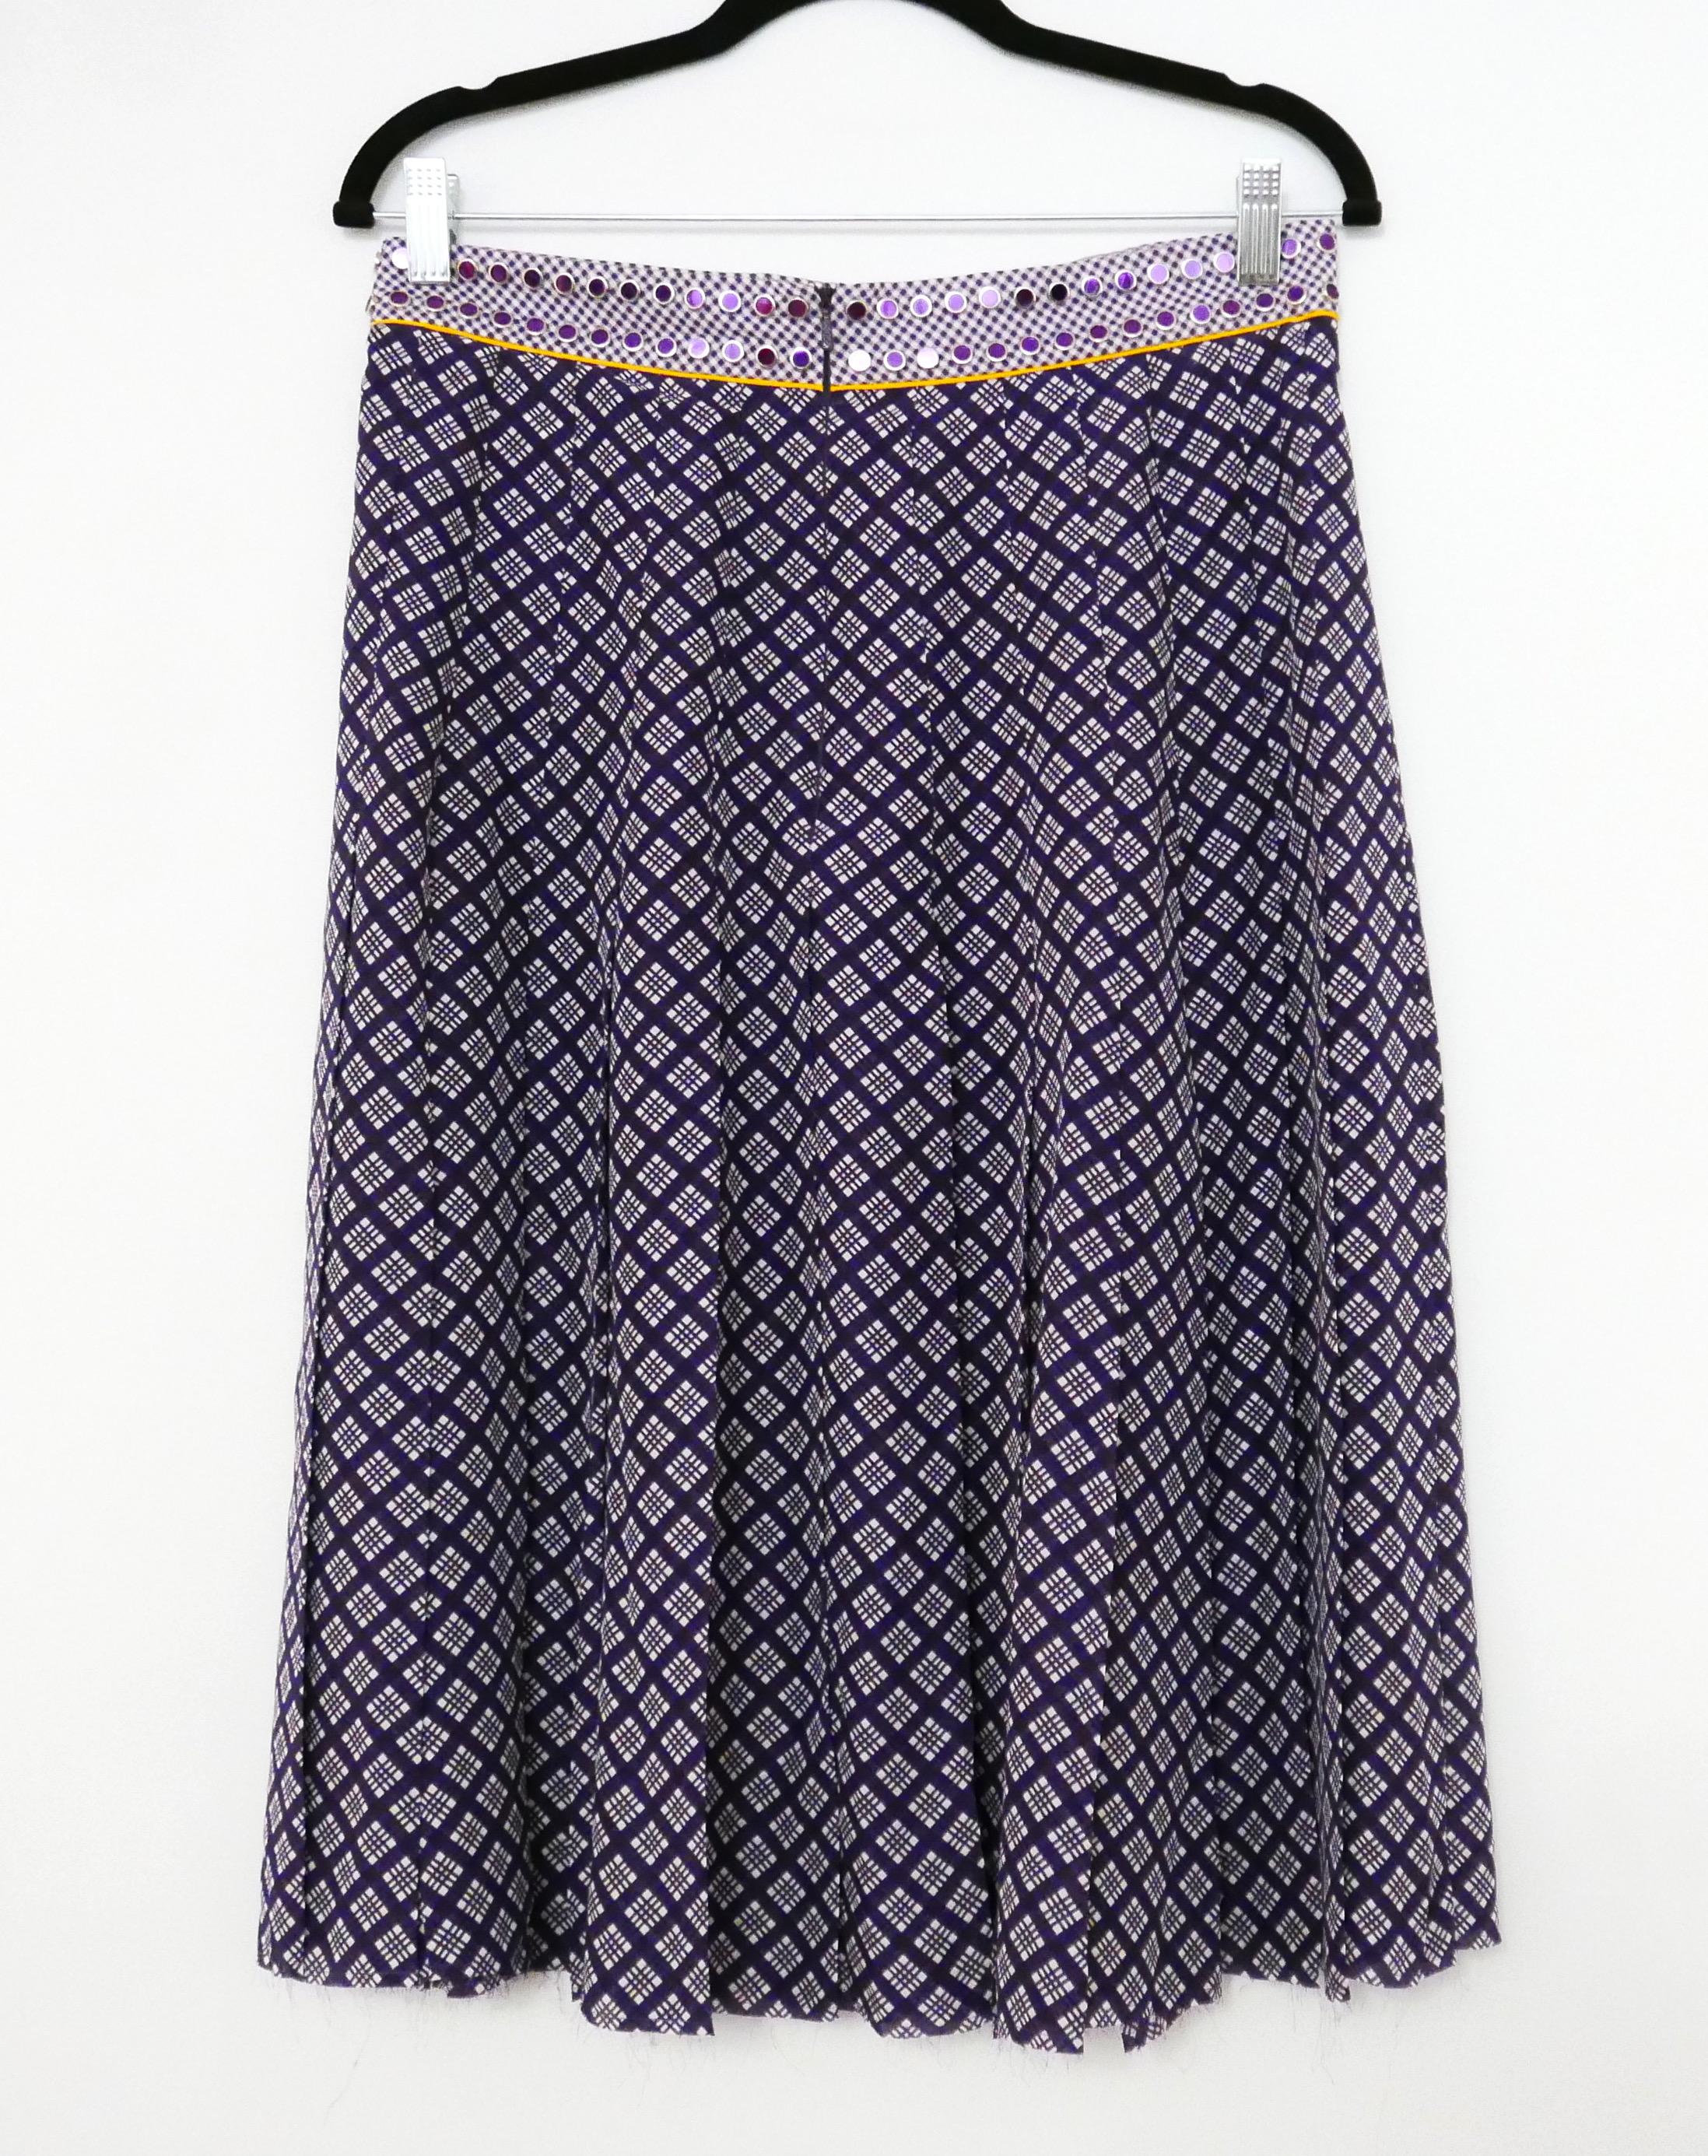 Super cool Western inspired skirt from Bottega Veneta’s SS18 collection. Bought for £950 and unworn. 

I have the matching shirt listed also.

Made from soft purple and white plaid printed silk with contrast waistband and purple mirror studded